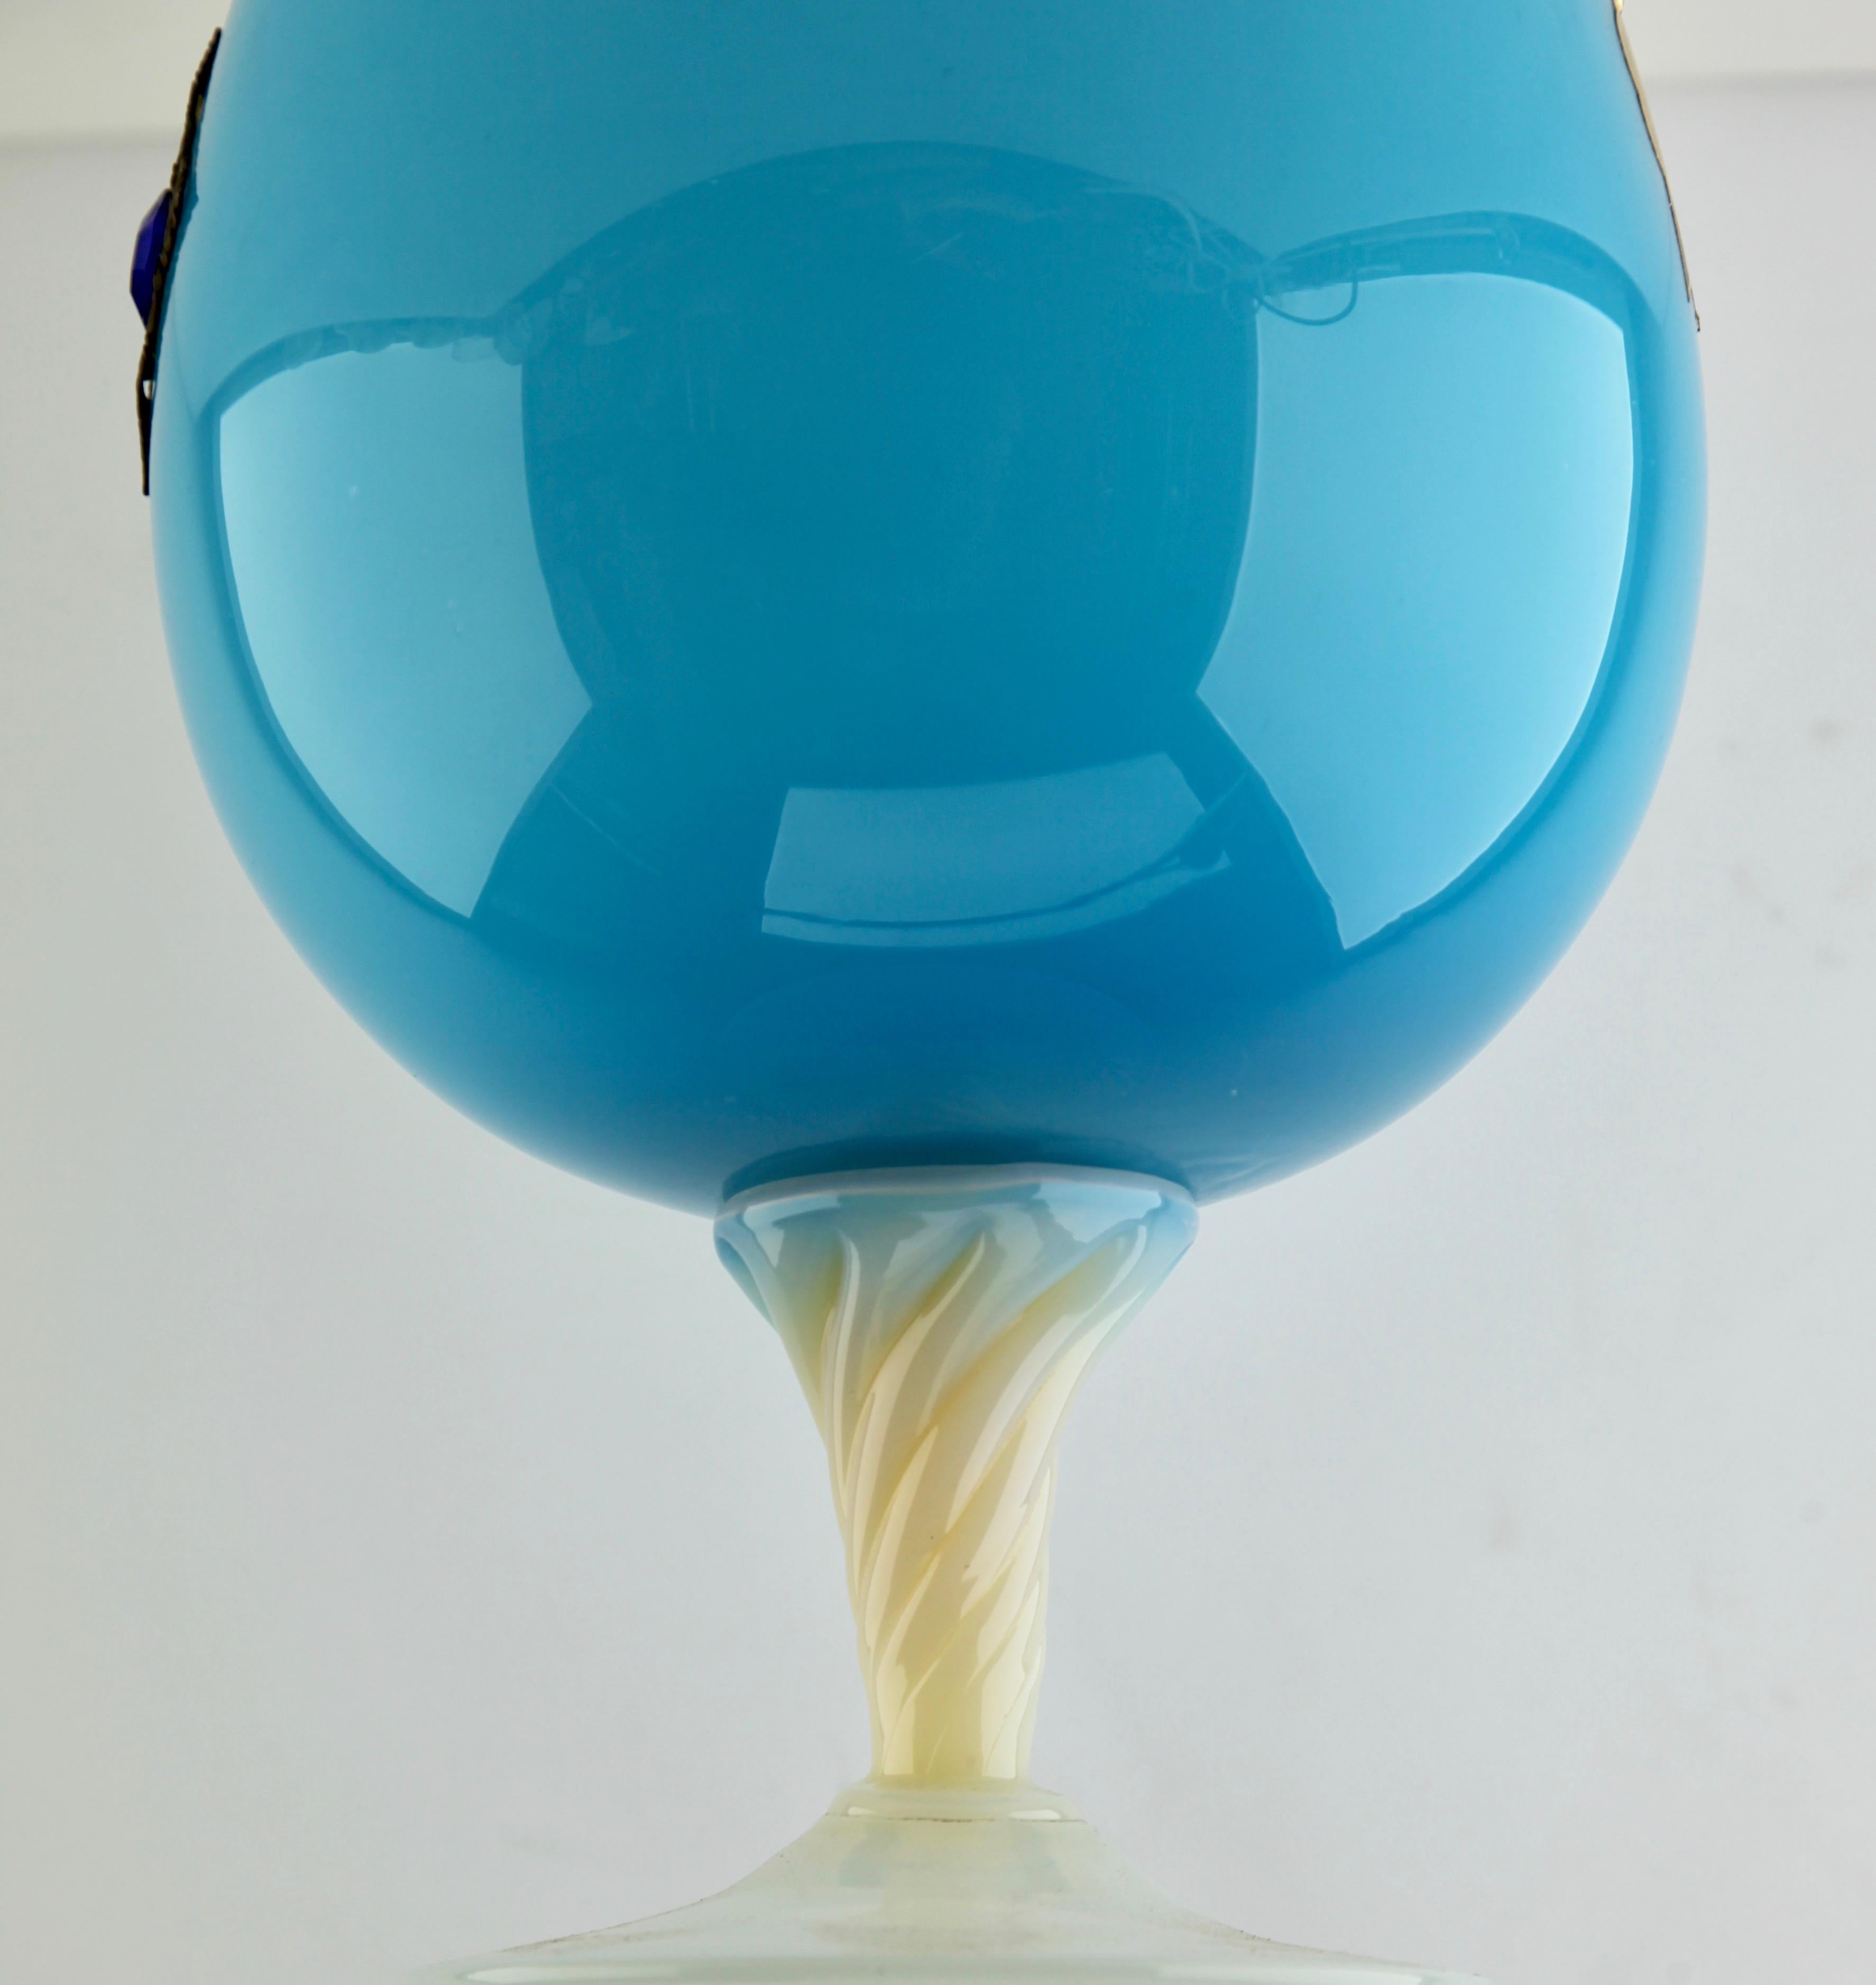 Empoli 'Florence, Italy' Cognac Glass in Turquoise in Opaline, 1970s 2